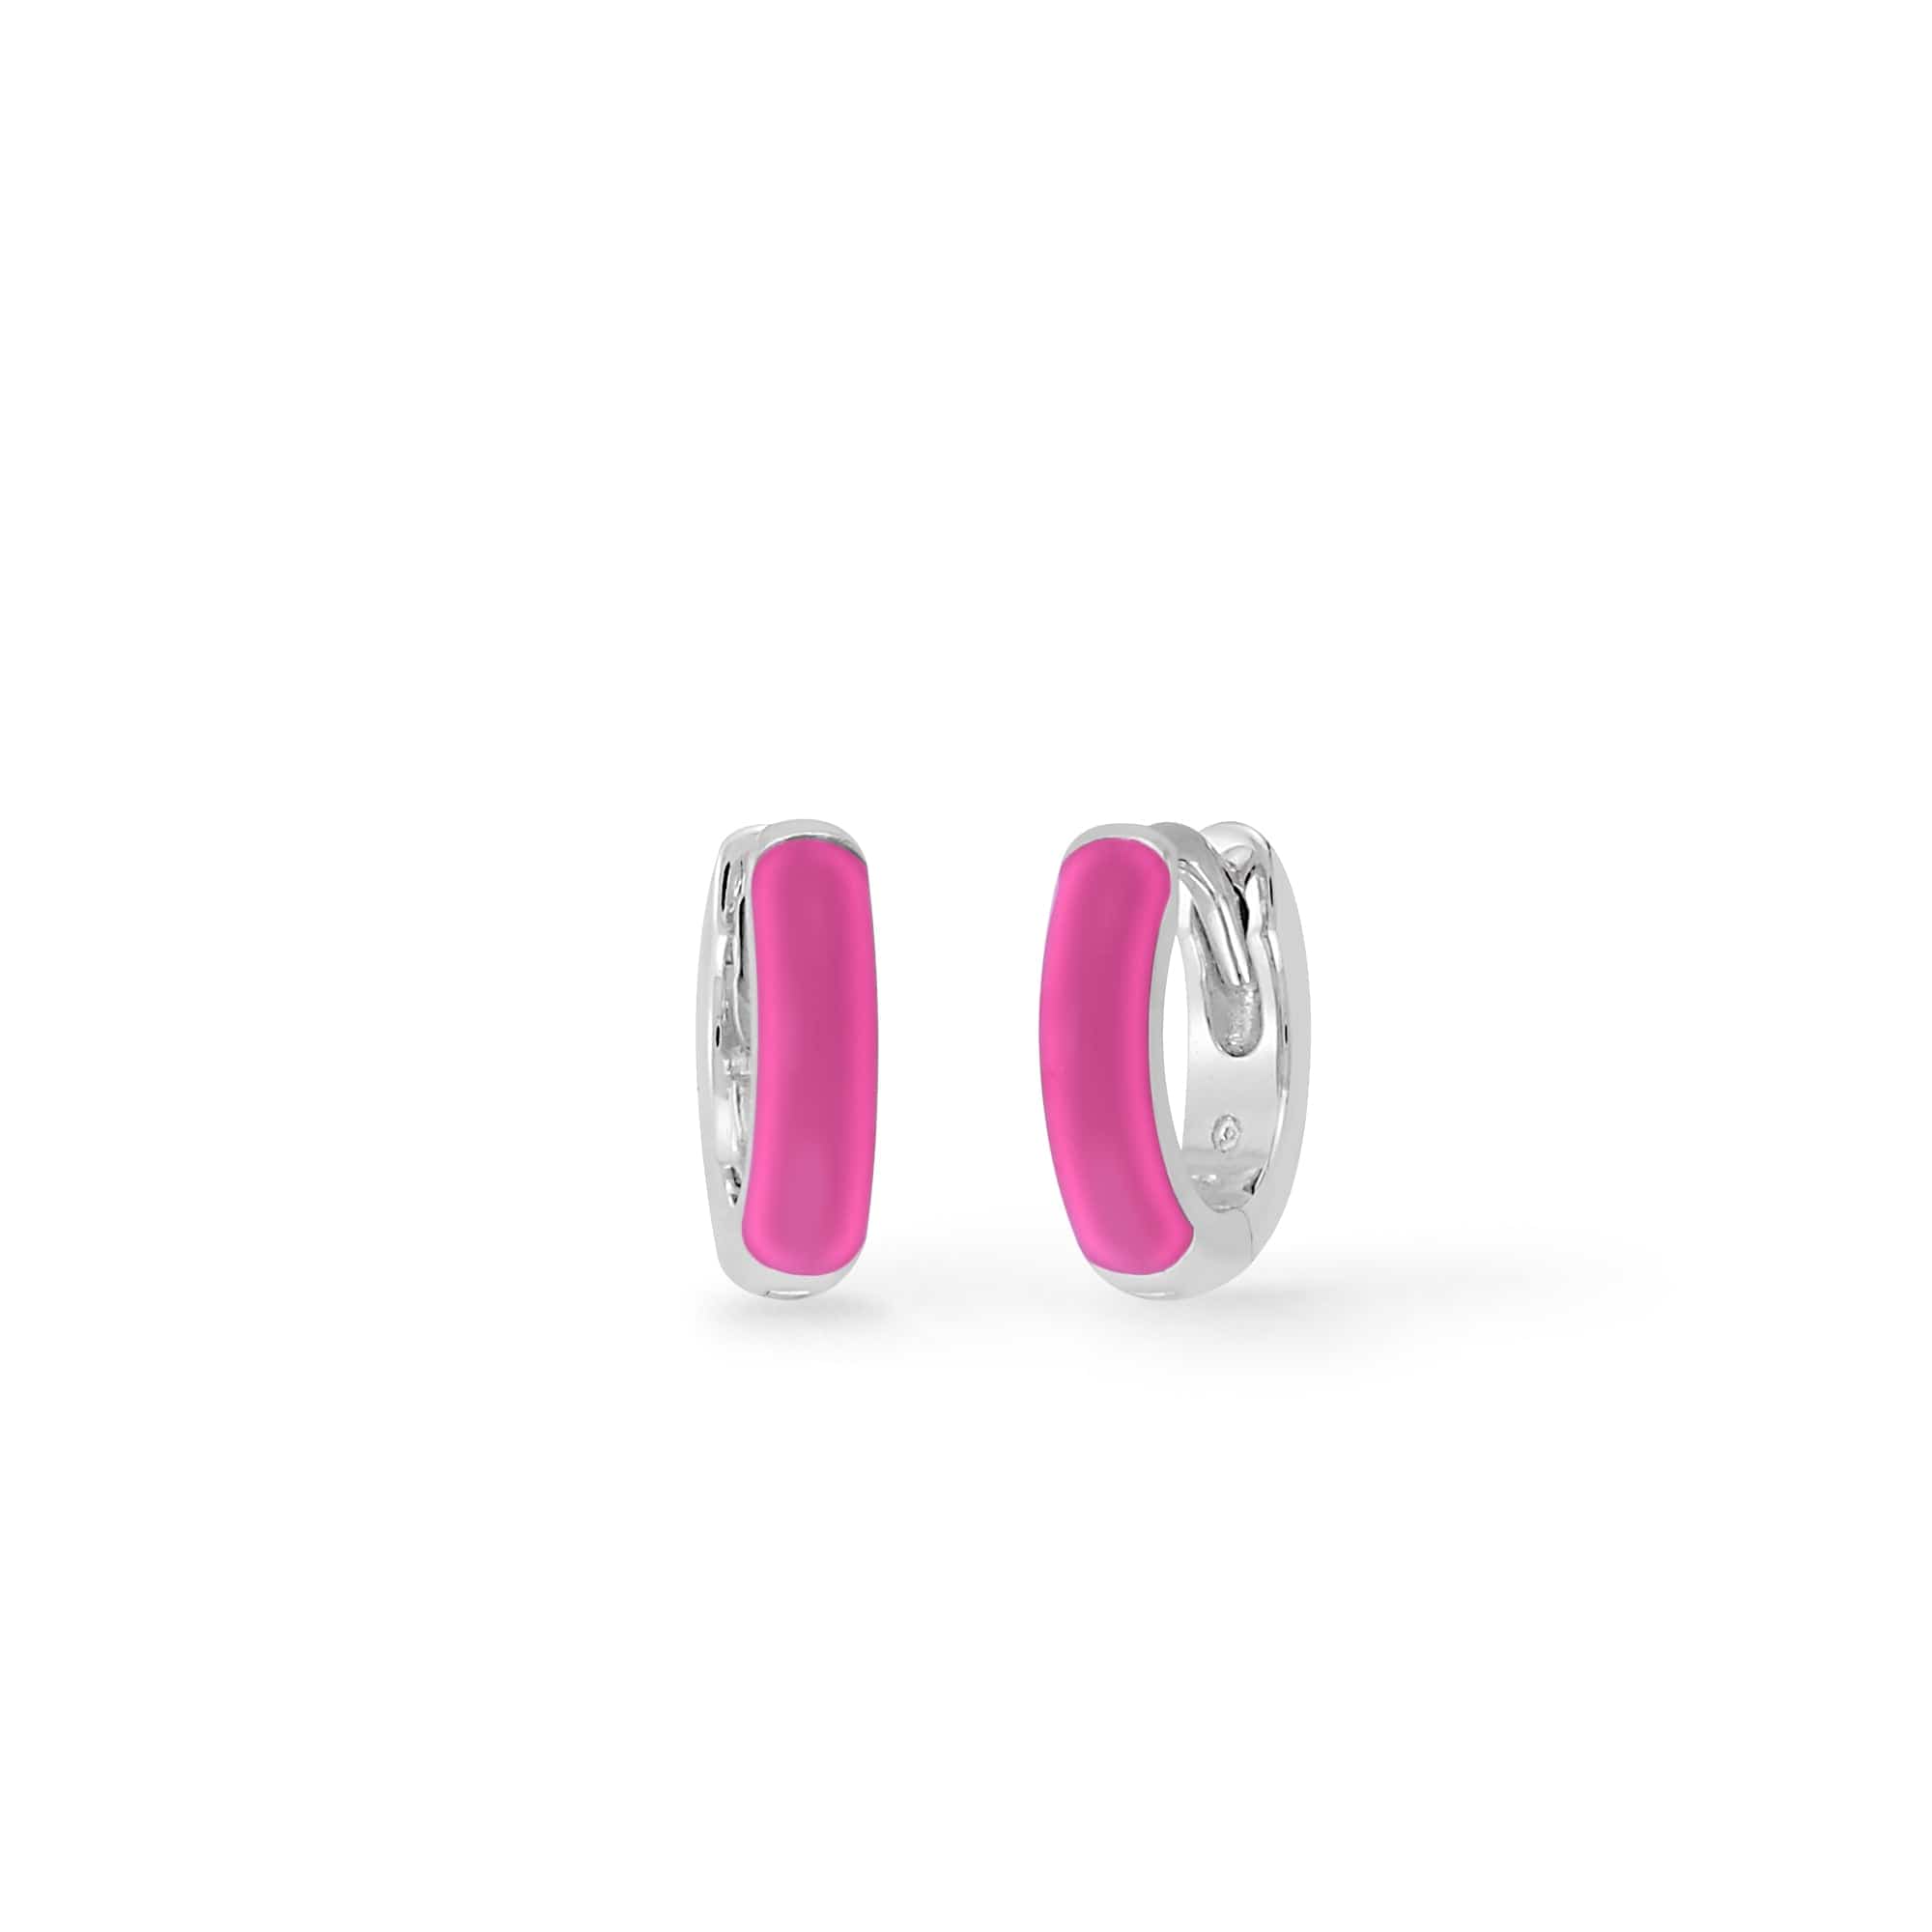 Boma Jewelry Earrings Pink / Sterling Silver Mini Huggie Hoops with Color